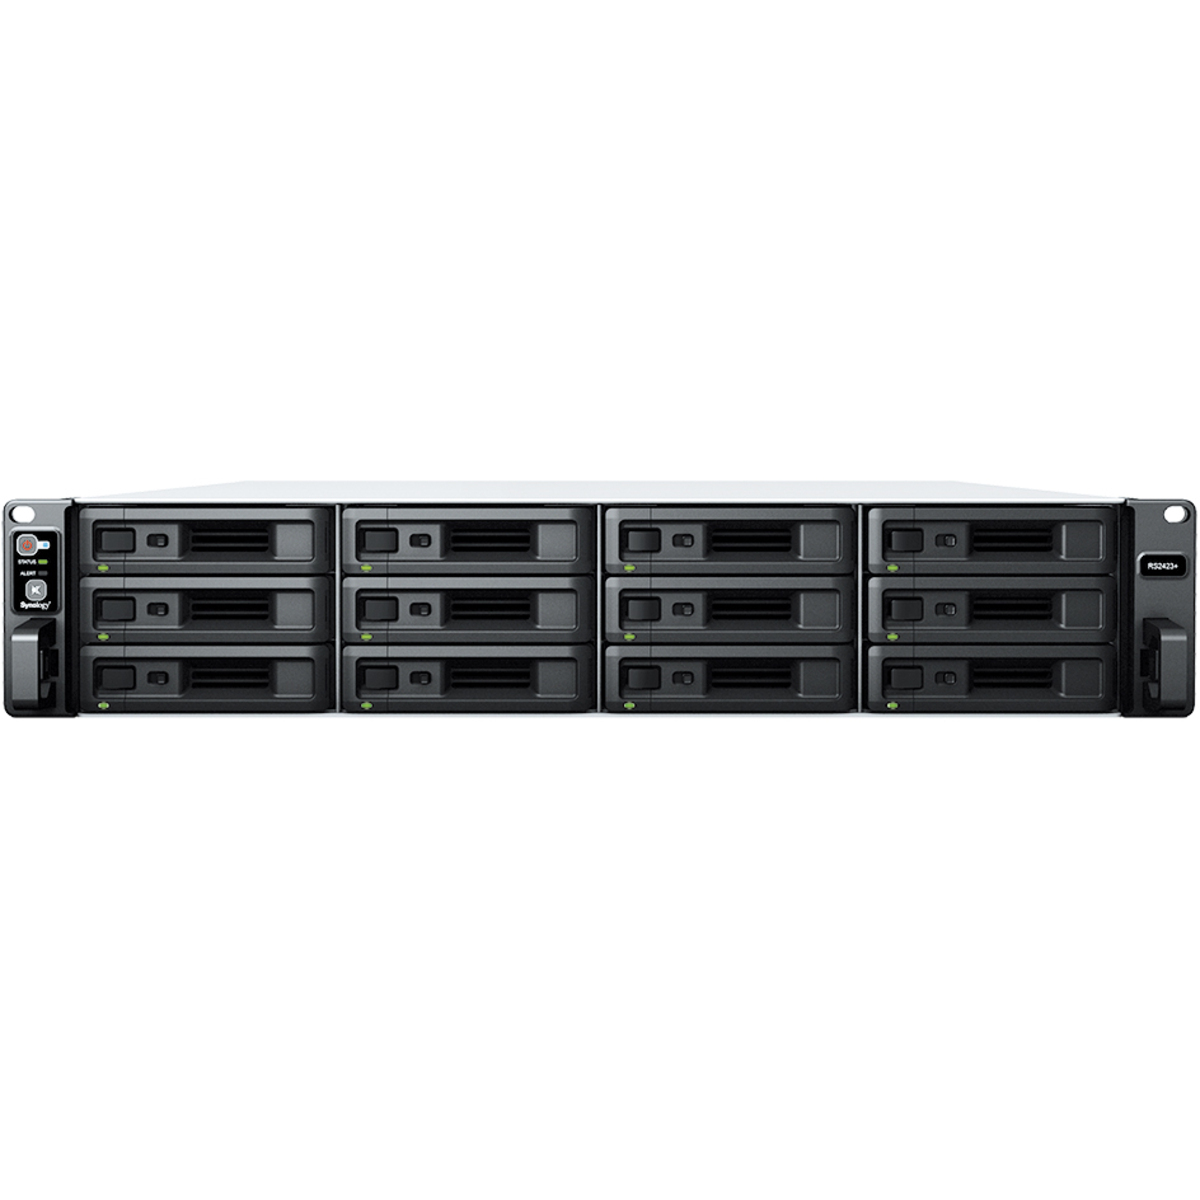 Synology RackStation RS2423RP+ 28tb 12-Bay RackMount Multimedia / Power User / Business NAS - Network Attached Storage Device 7x4tb Western Digital Gold WD4004FRYZ 3.5 7200rpm SATA 6Gb/s HDD ENTERPRISE Class Drives Installed - Burn-In Tested - FREE RAM UPGRADE RackStation RS2423RP+